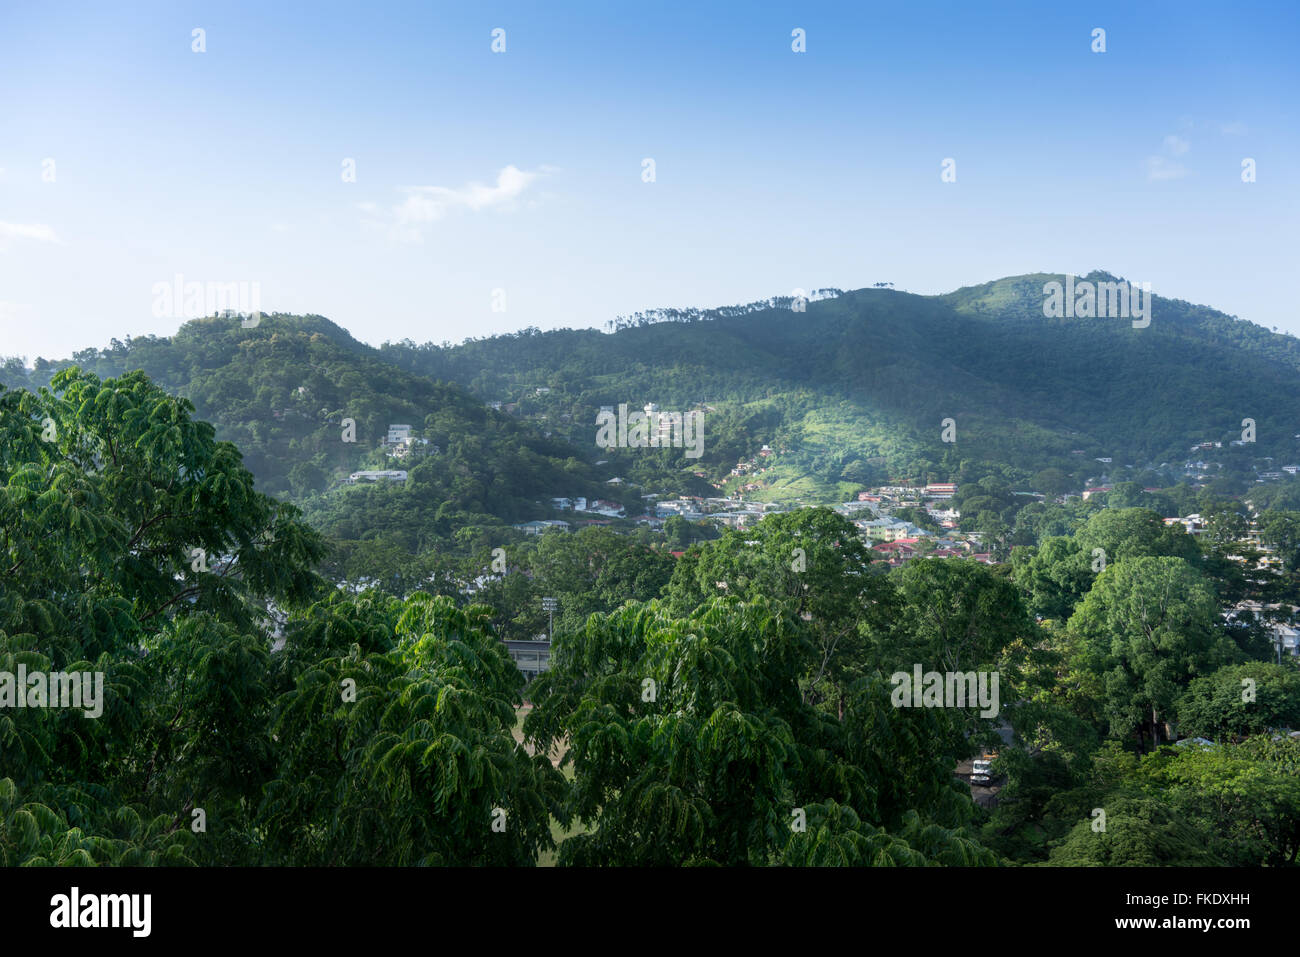 Scenic view of mountain against cloudy sky, Trinidad, Trinidad And Tobago Stock Photo